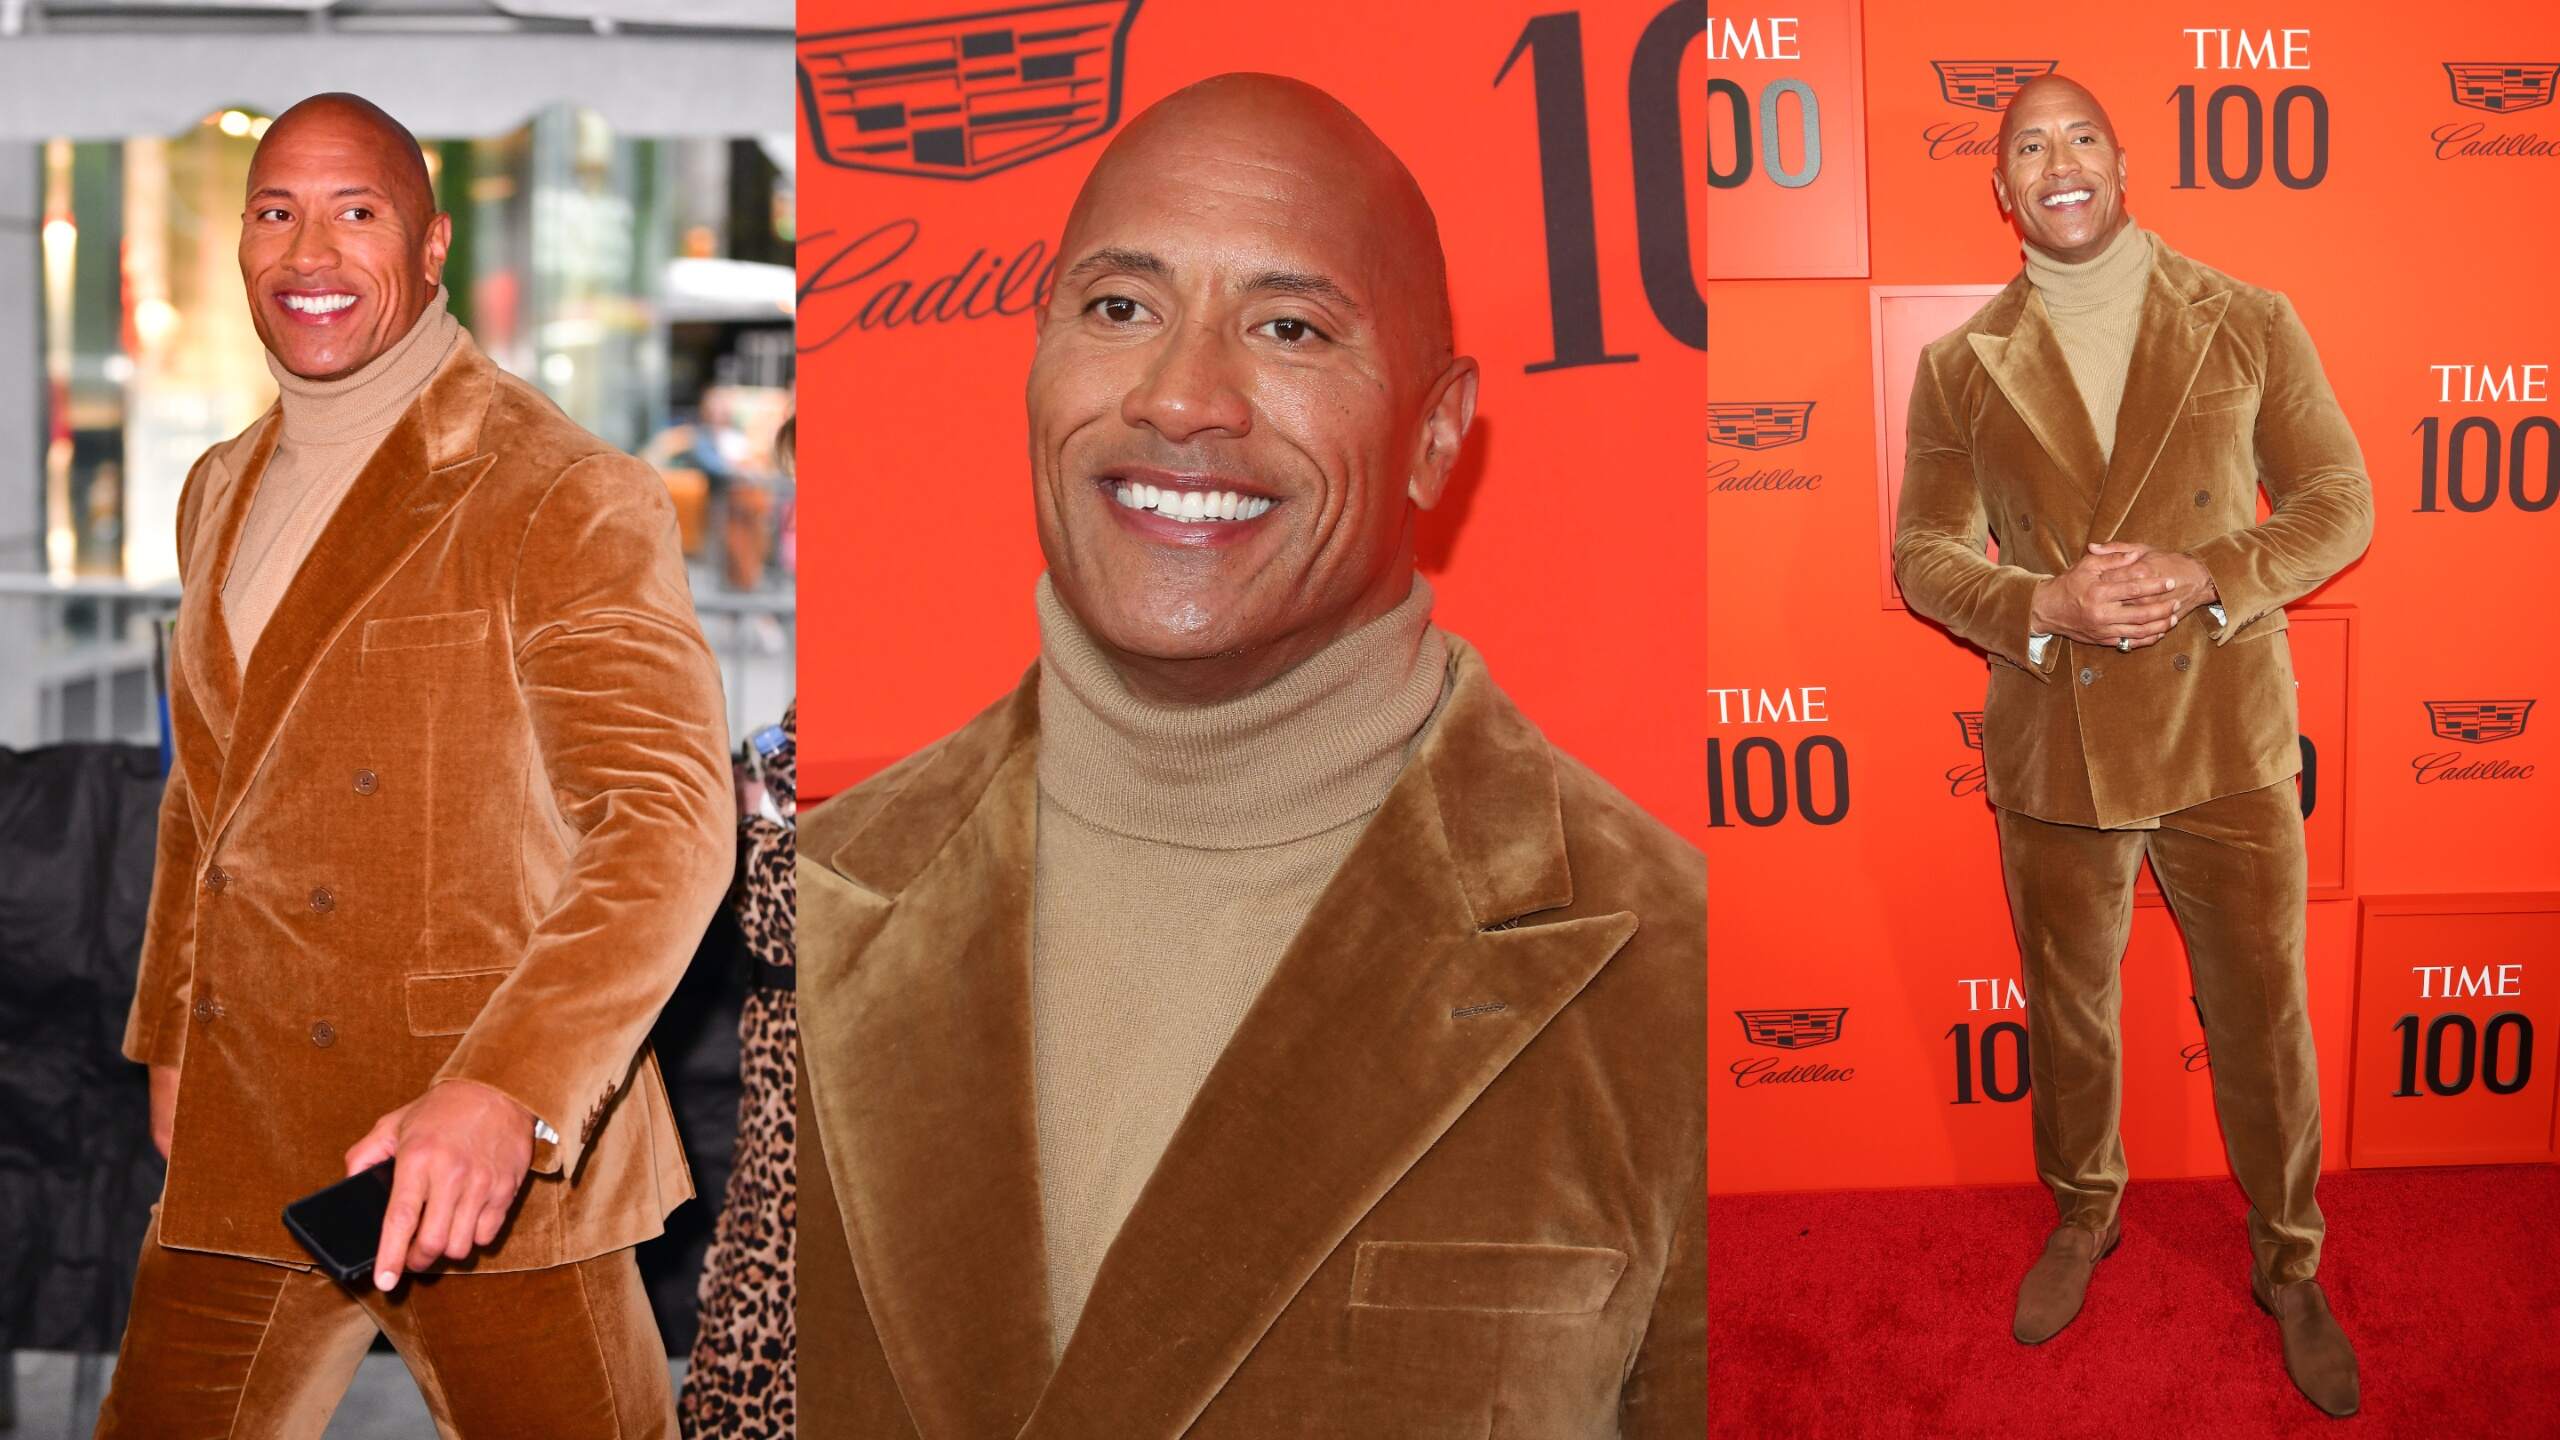 Wearing a copper velvet suit, Dwayne Johnson walks the red carpet at the Time 100 ceremony